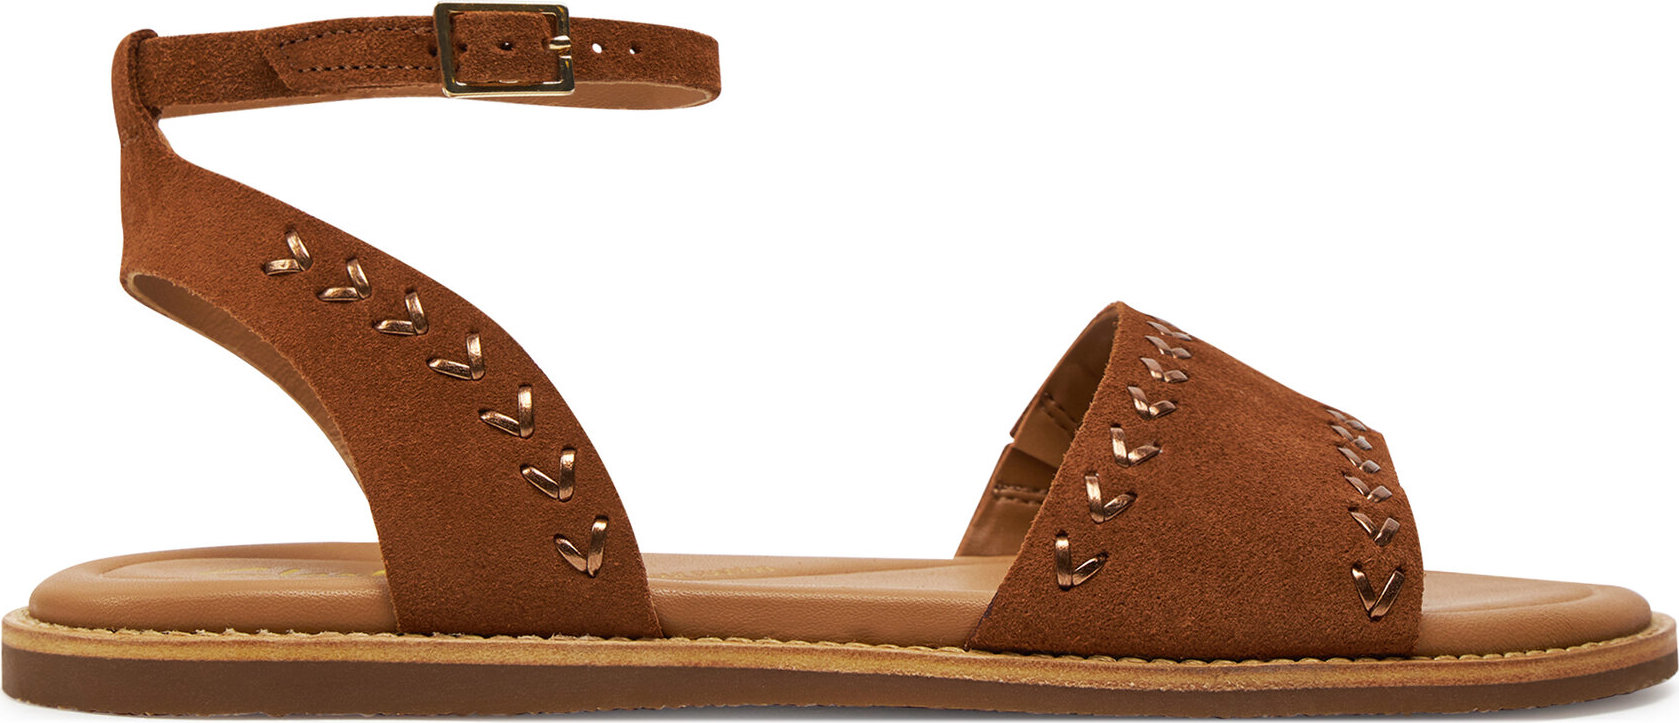 Sandály Clarks Maritime May 26176291 Tan Suede